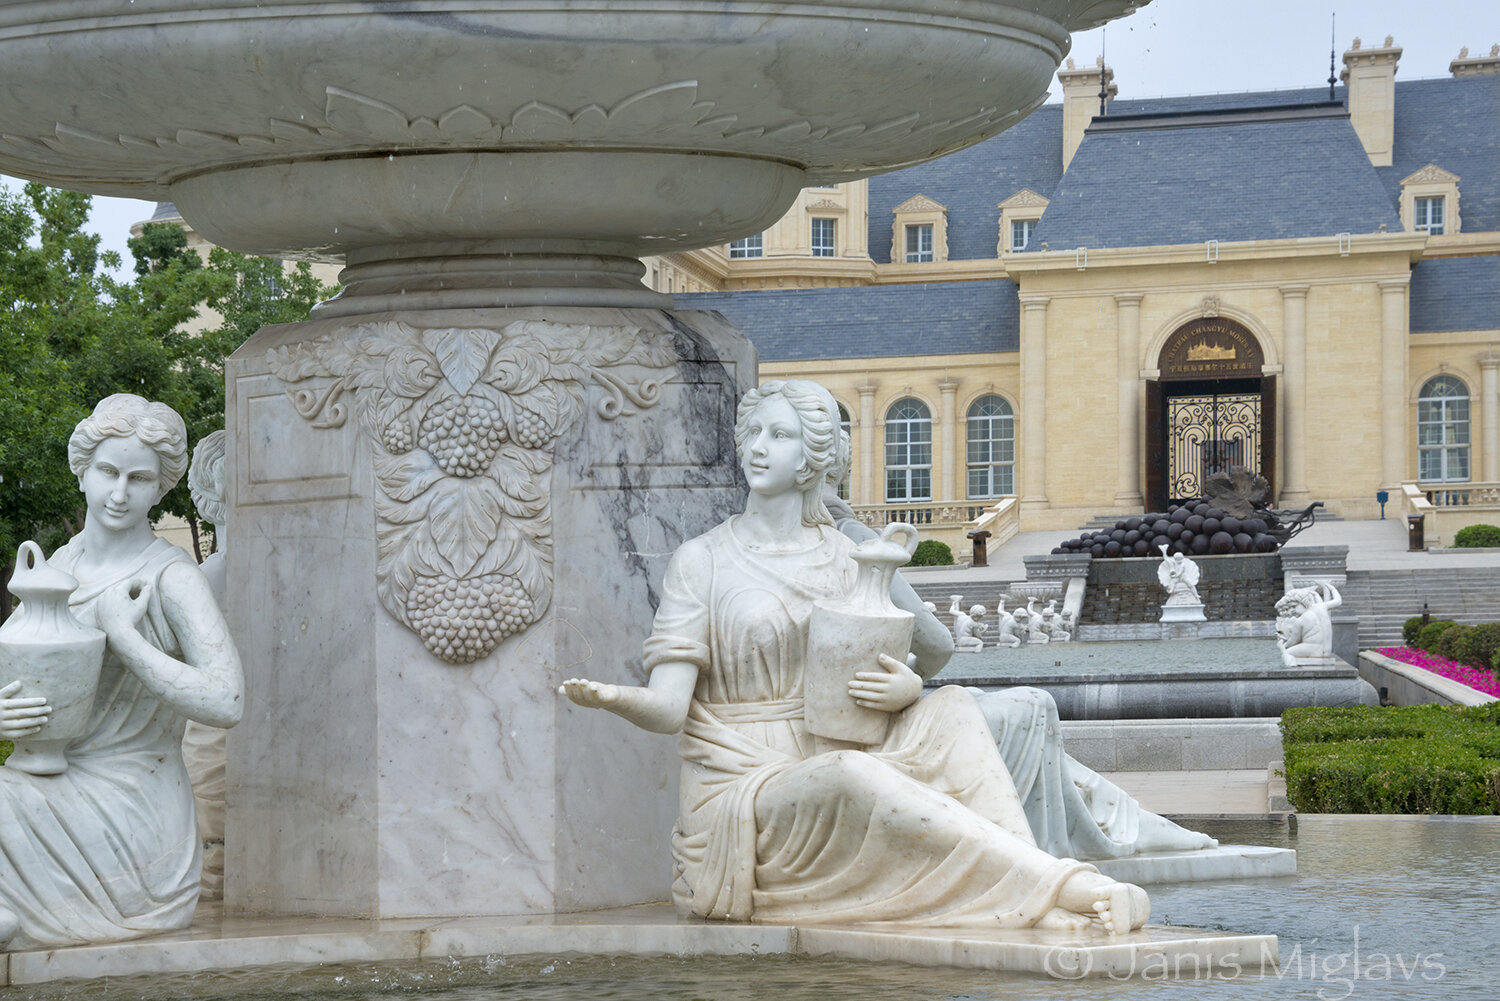 No Chinese winery should be without European maidens under the fountain.